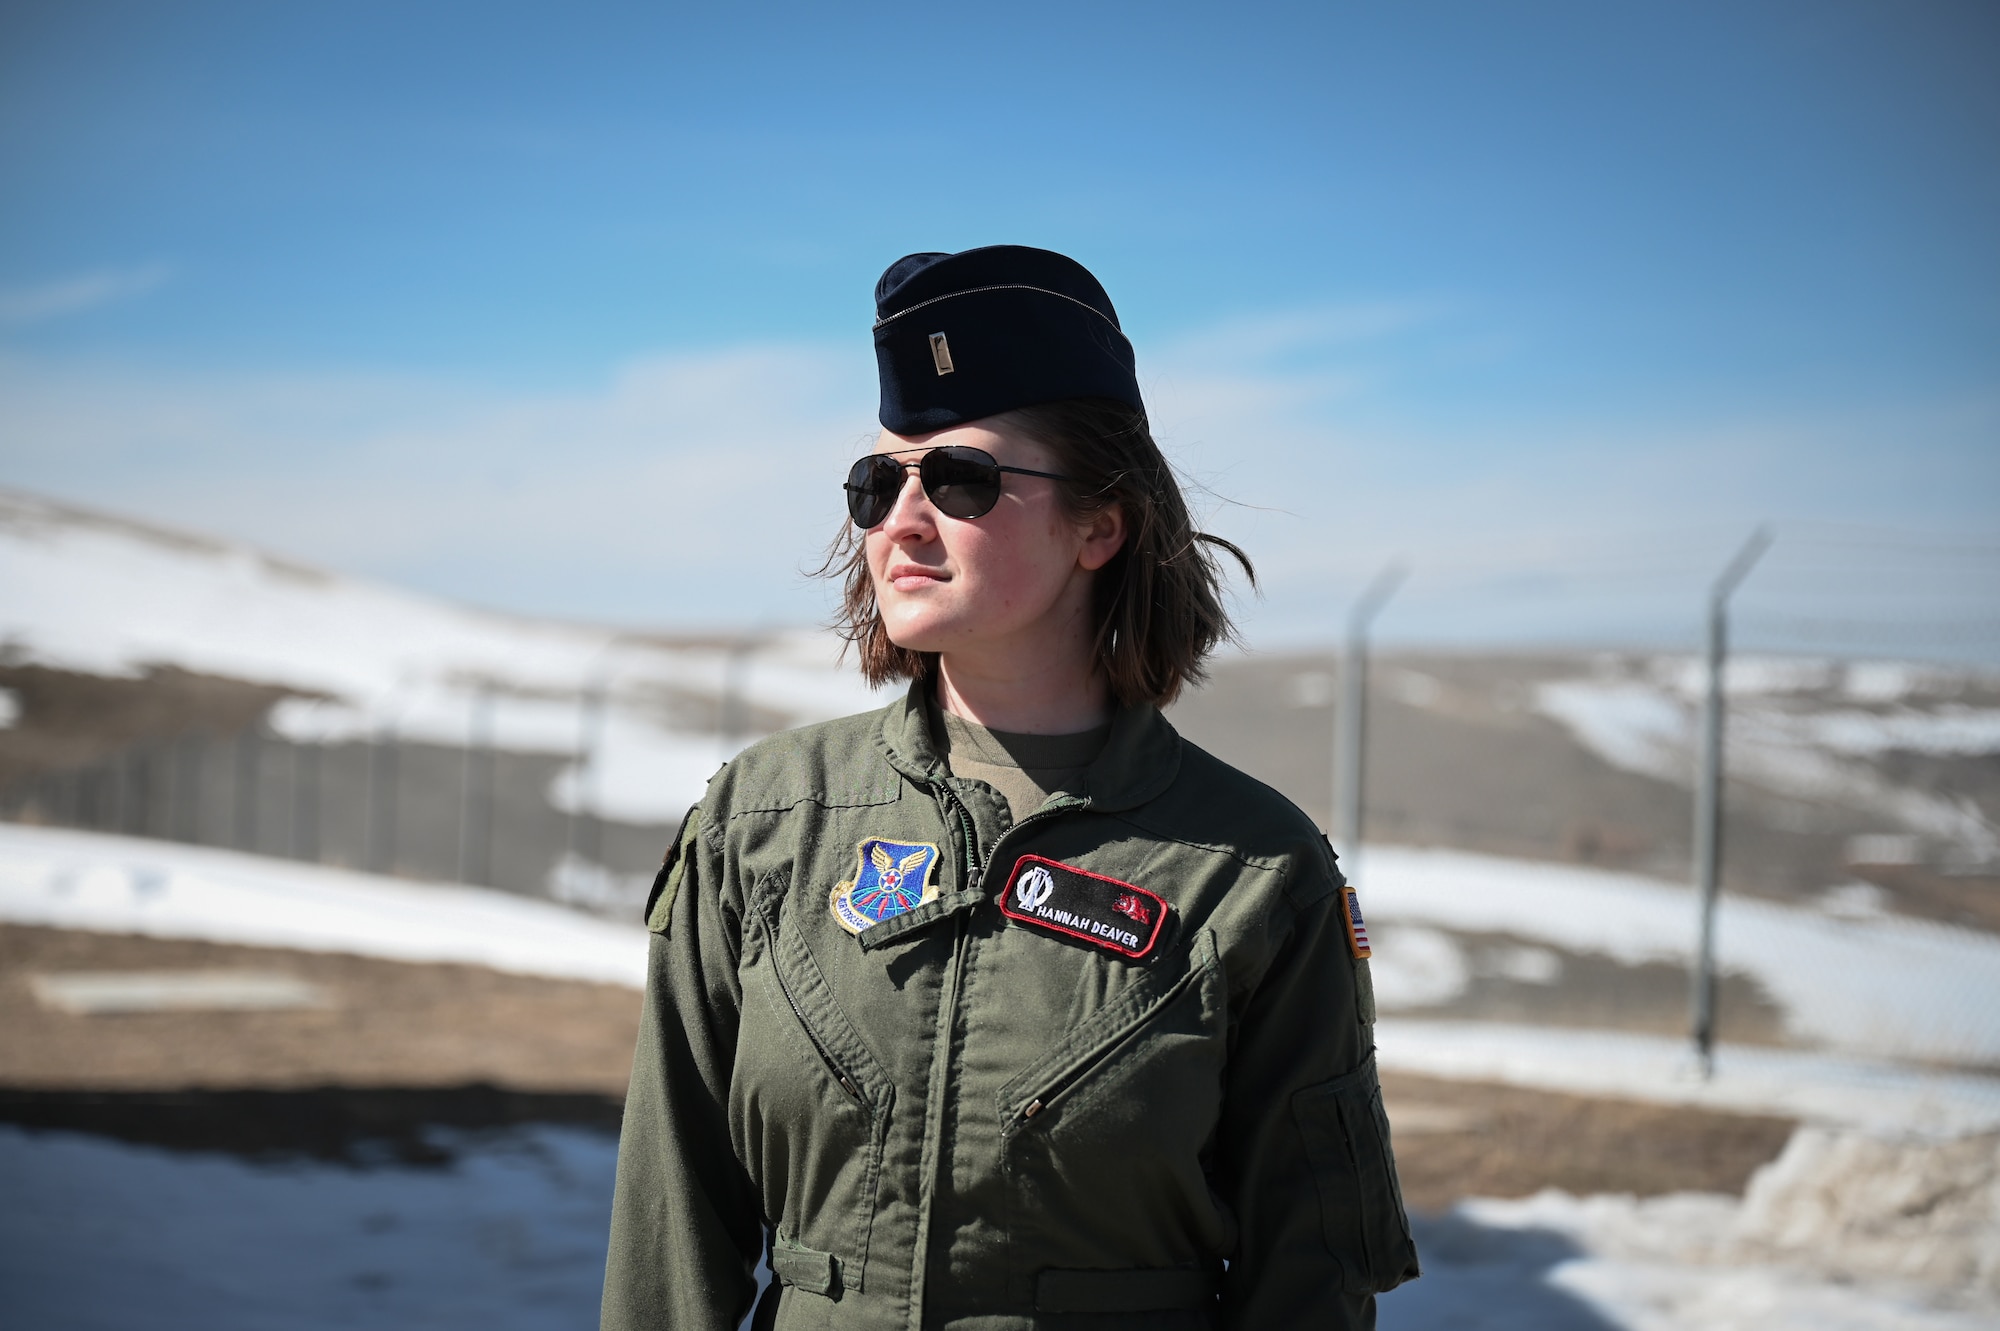 A woman in a green flight suit, blue flight cap and black sunglasses stands in the center of the photo with snow in the background.